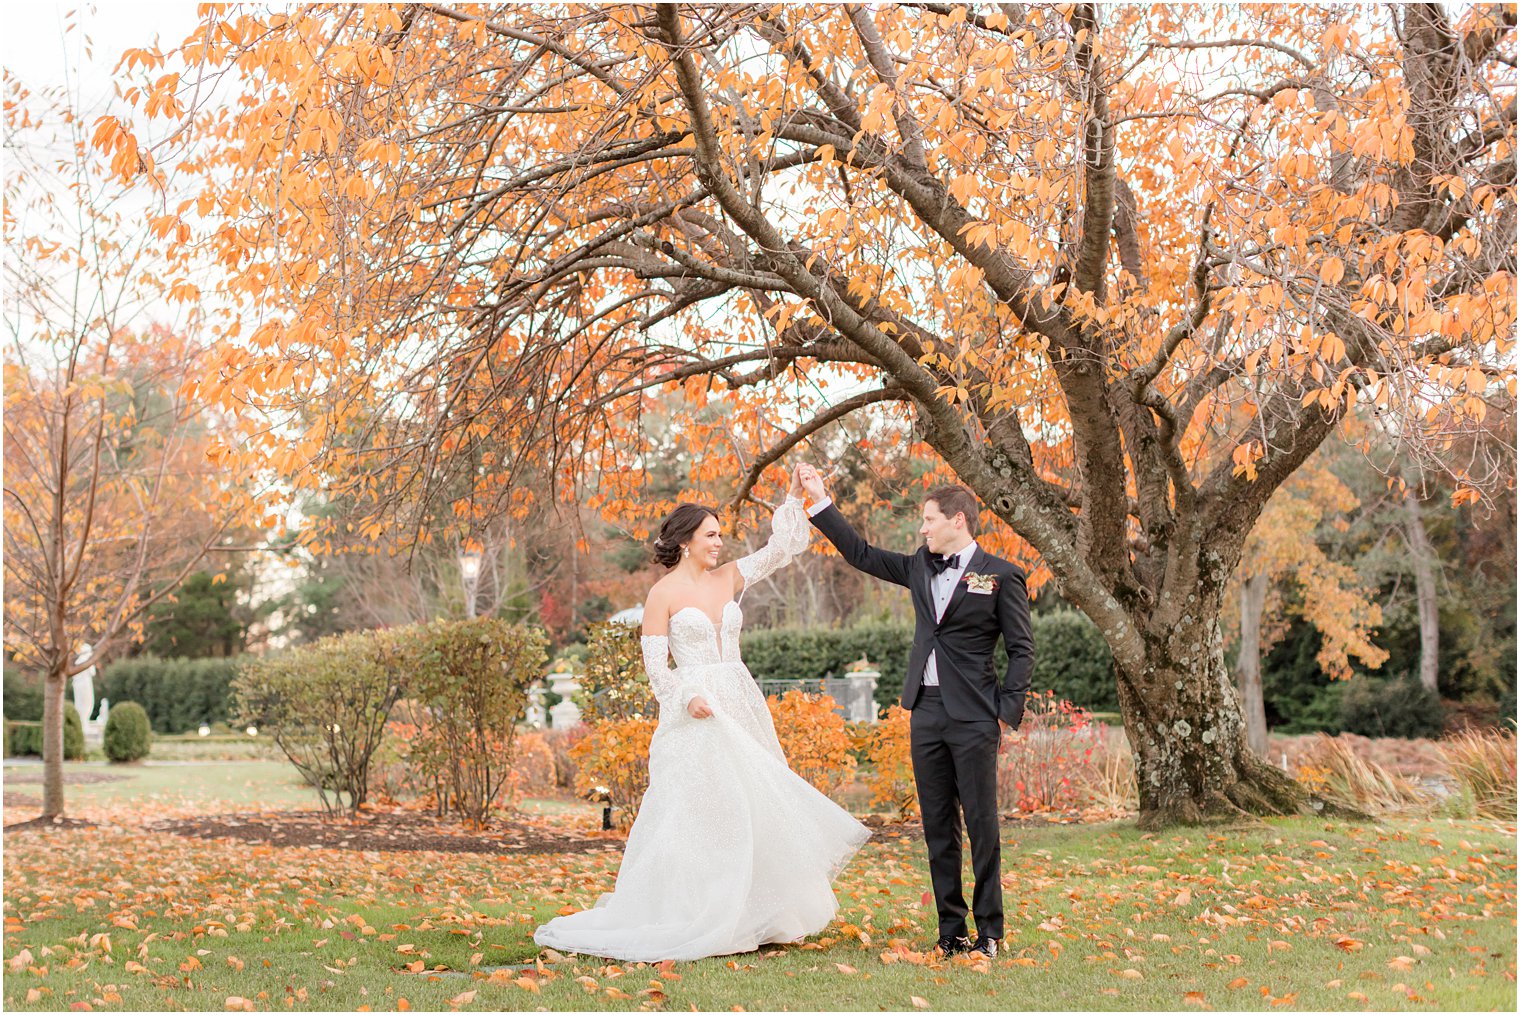 groom twirls bride under tree with orange leaves on the lawn at Park Chateau Estate